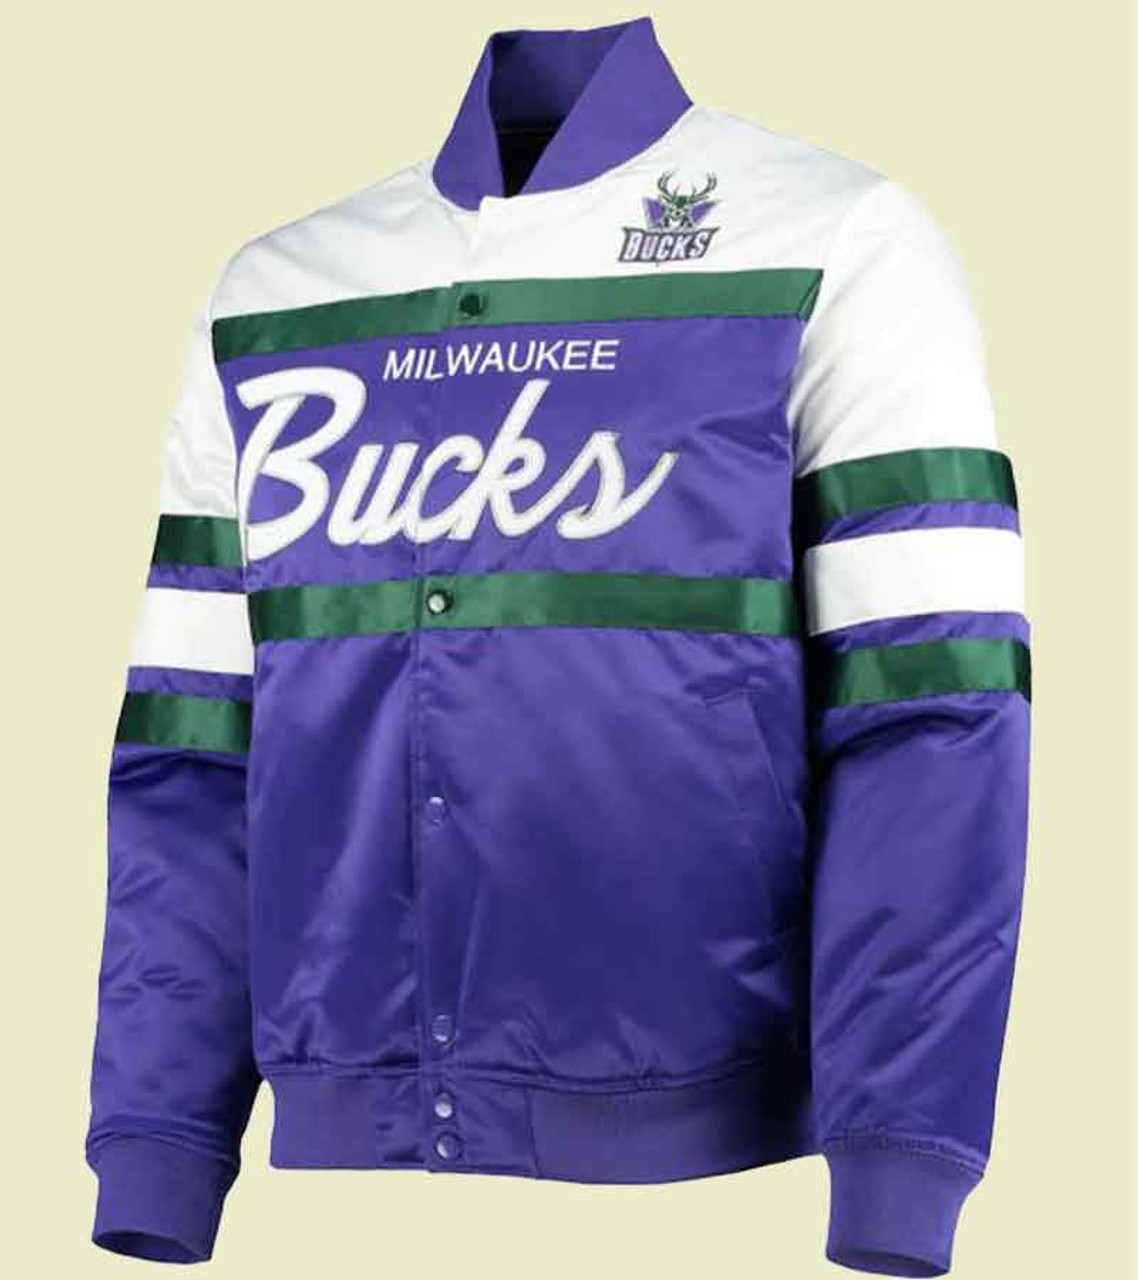 Purple Letterman Jacket with White Leather Sleeves